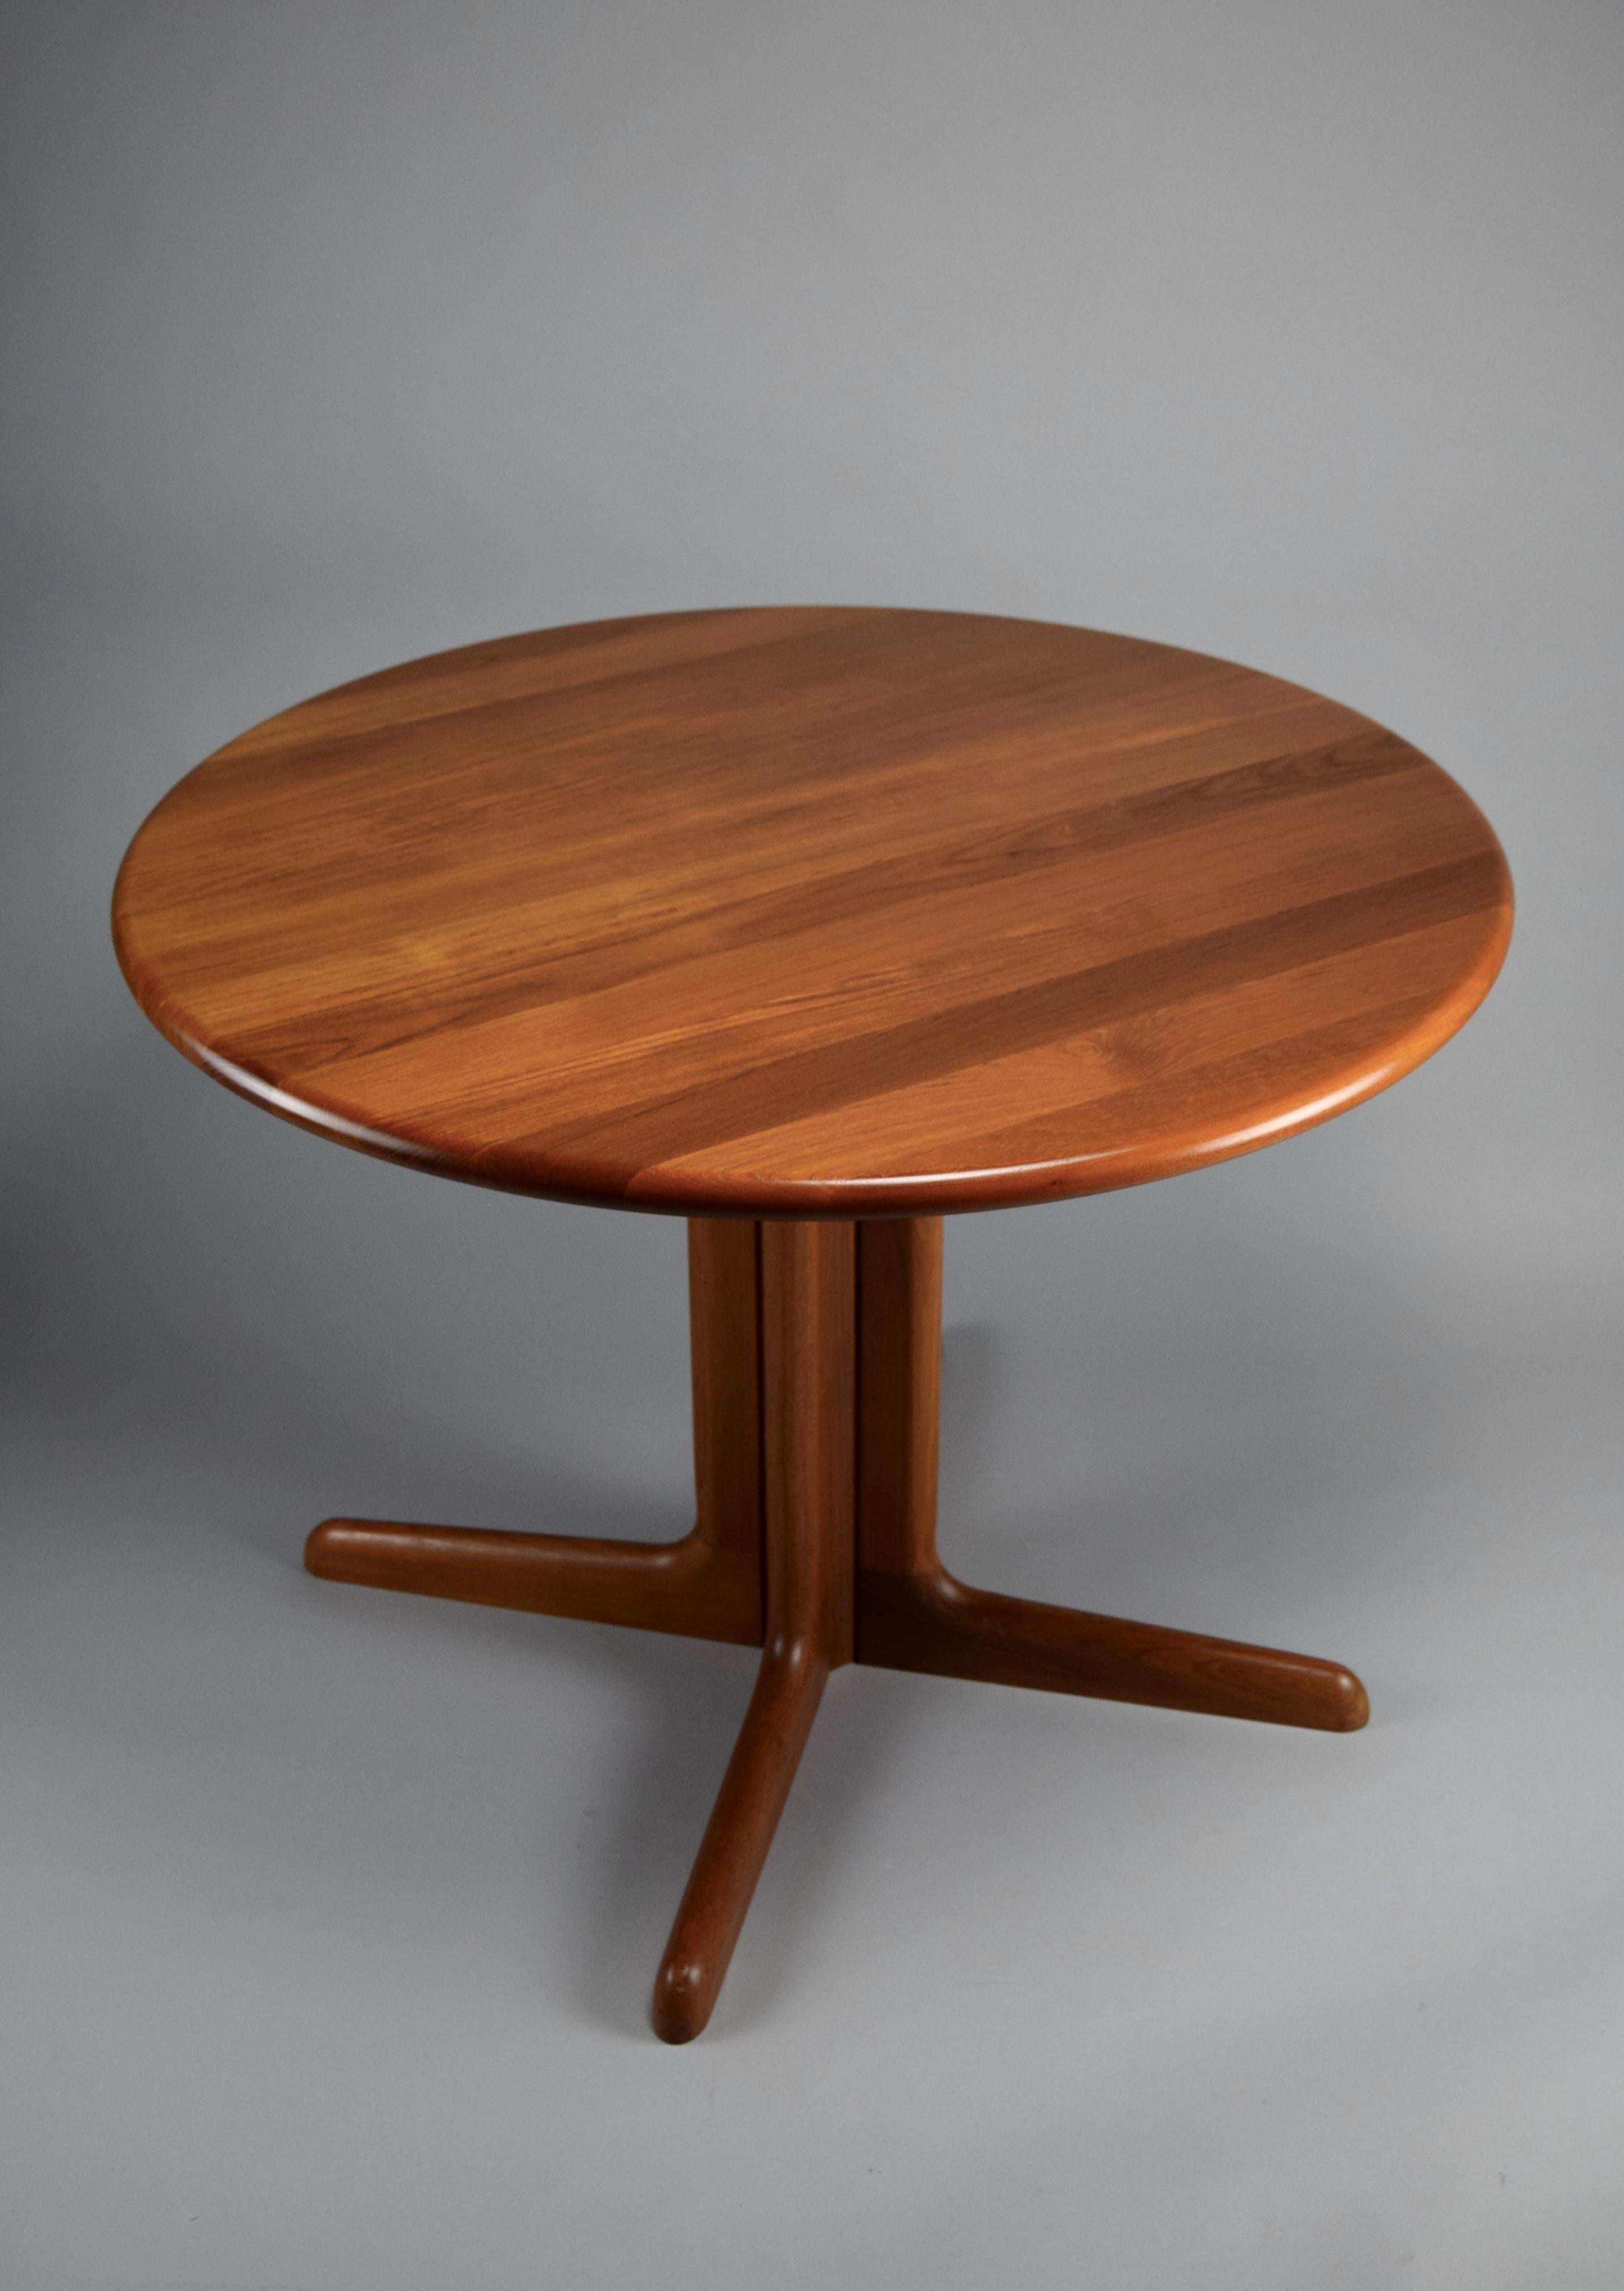 Extendable Danish Mid-Century Modern Solid Jatoba Wooden Dining Table For Sale 5